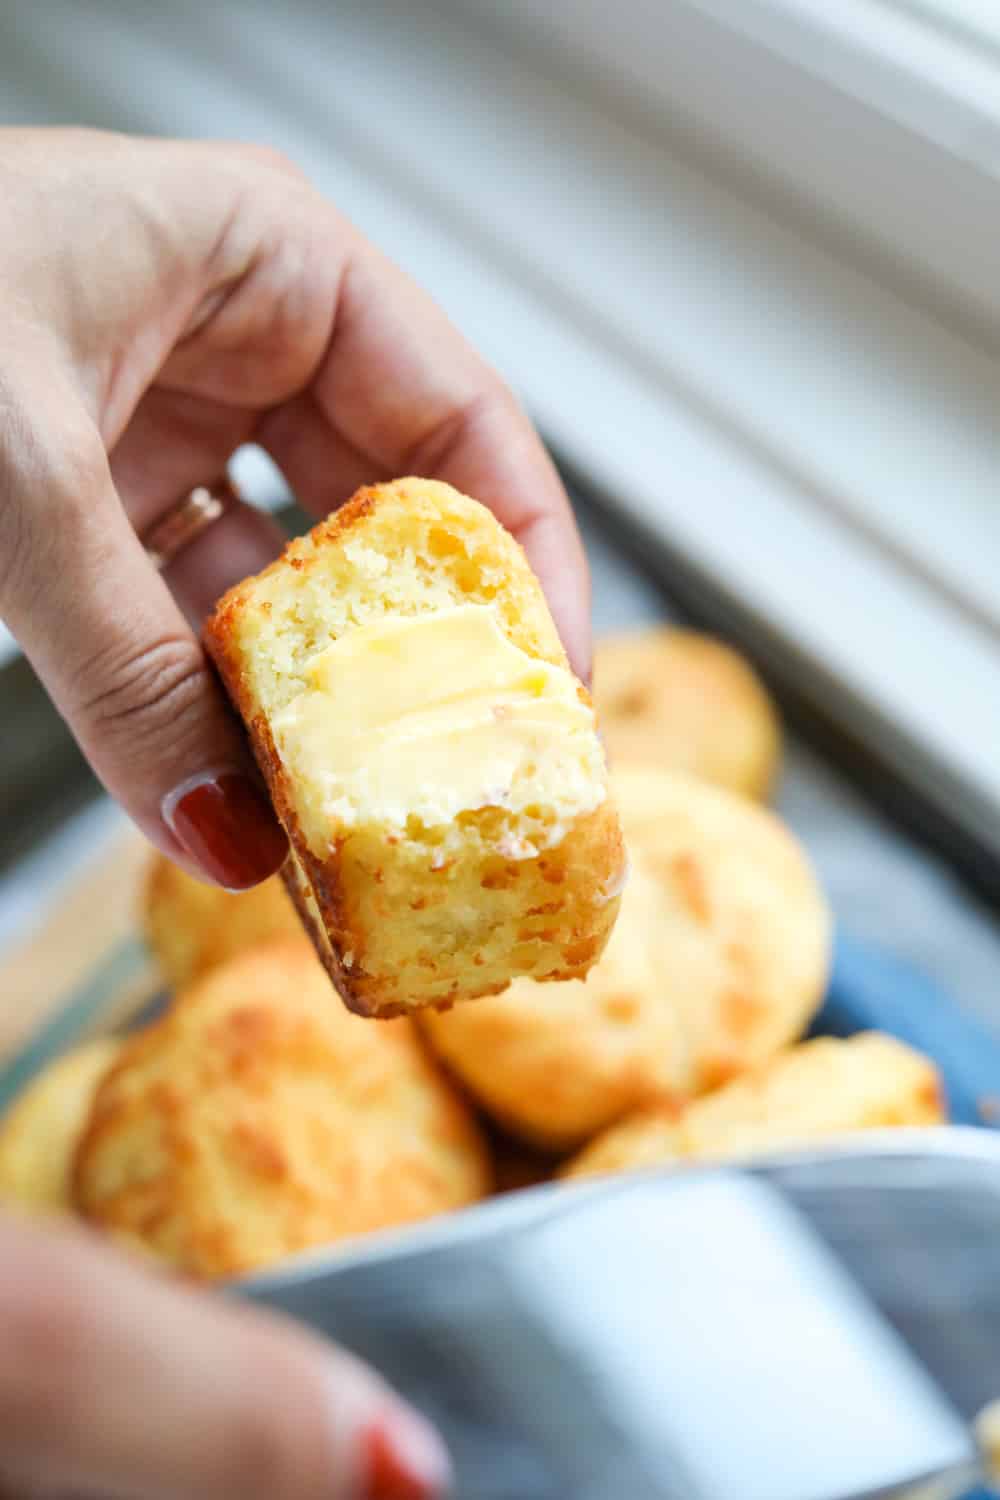 A biscuit that's been buttered being held in a hand.